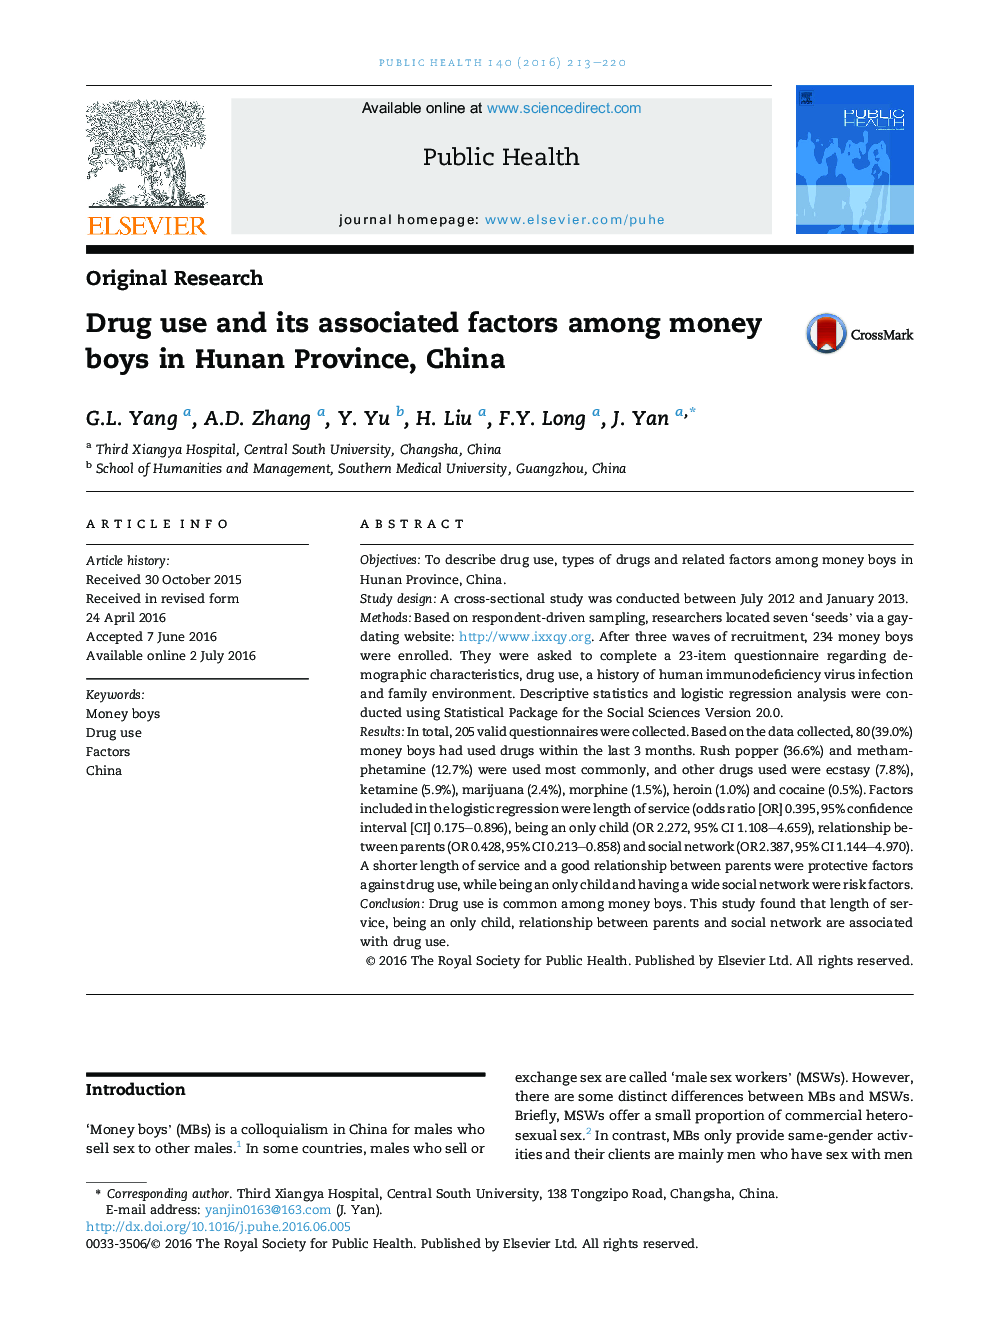 Drug use and its associated factors among money boys in Hunan Province, China